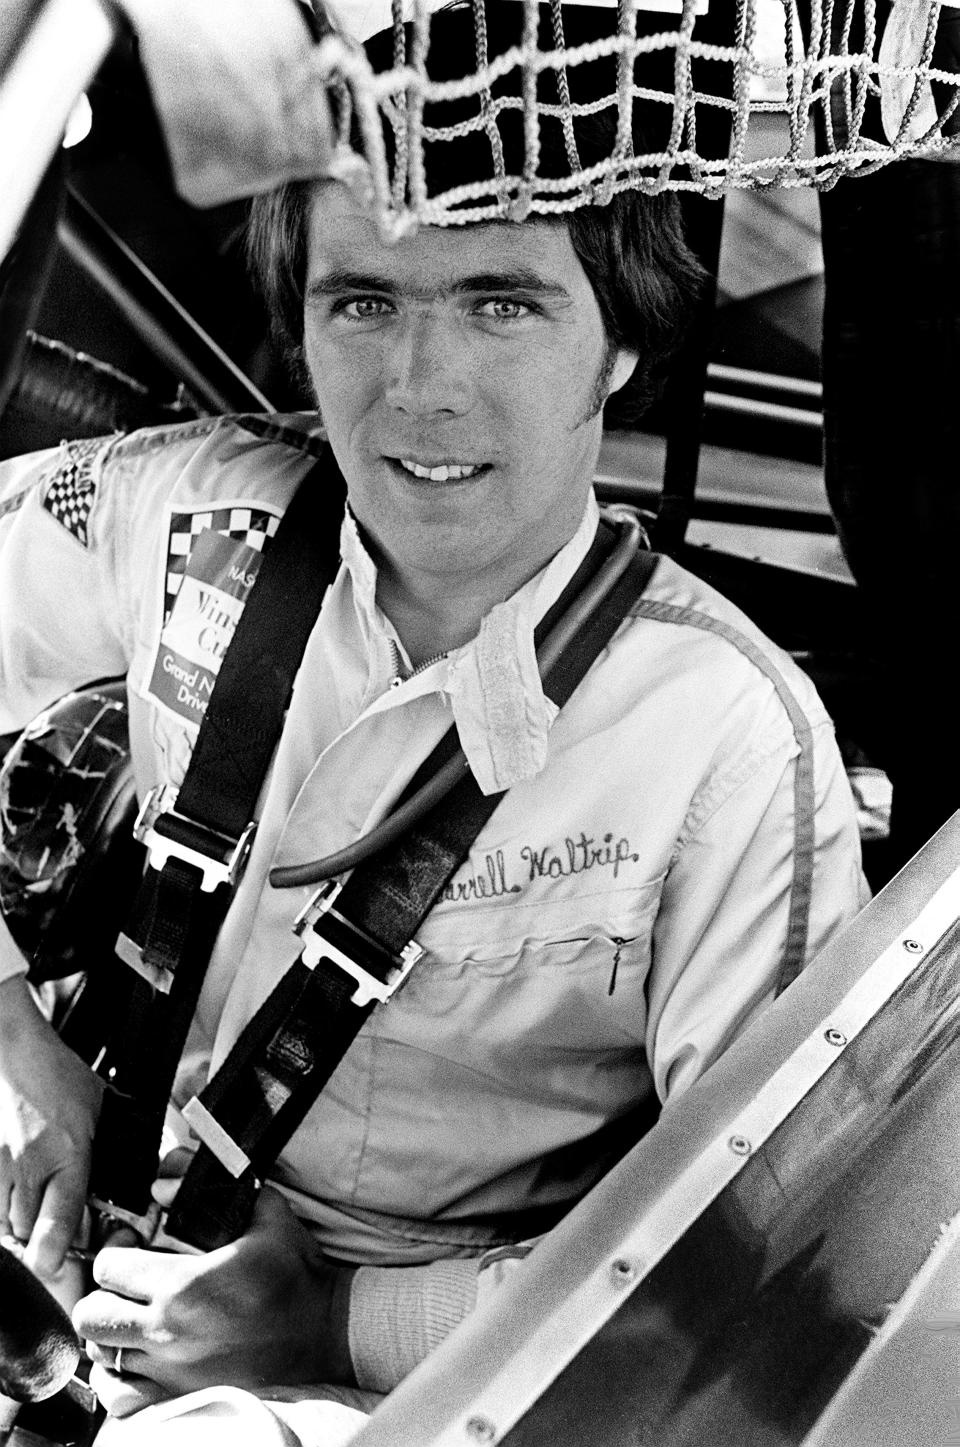 Darrell Waltrip exploded onto the NASCAR scene in the 1970s and shook things up.